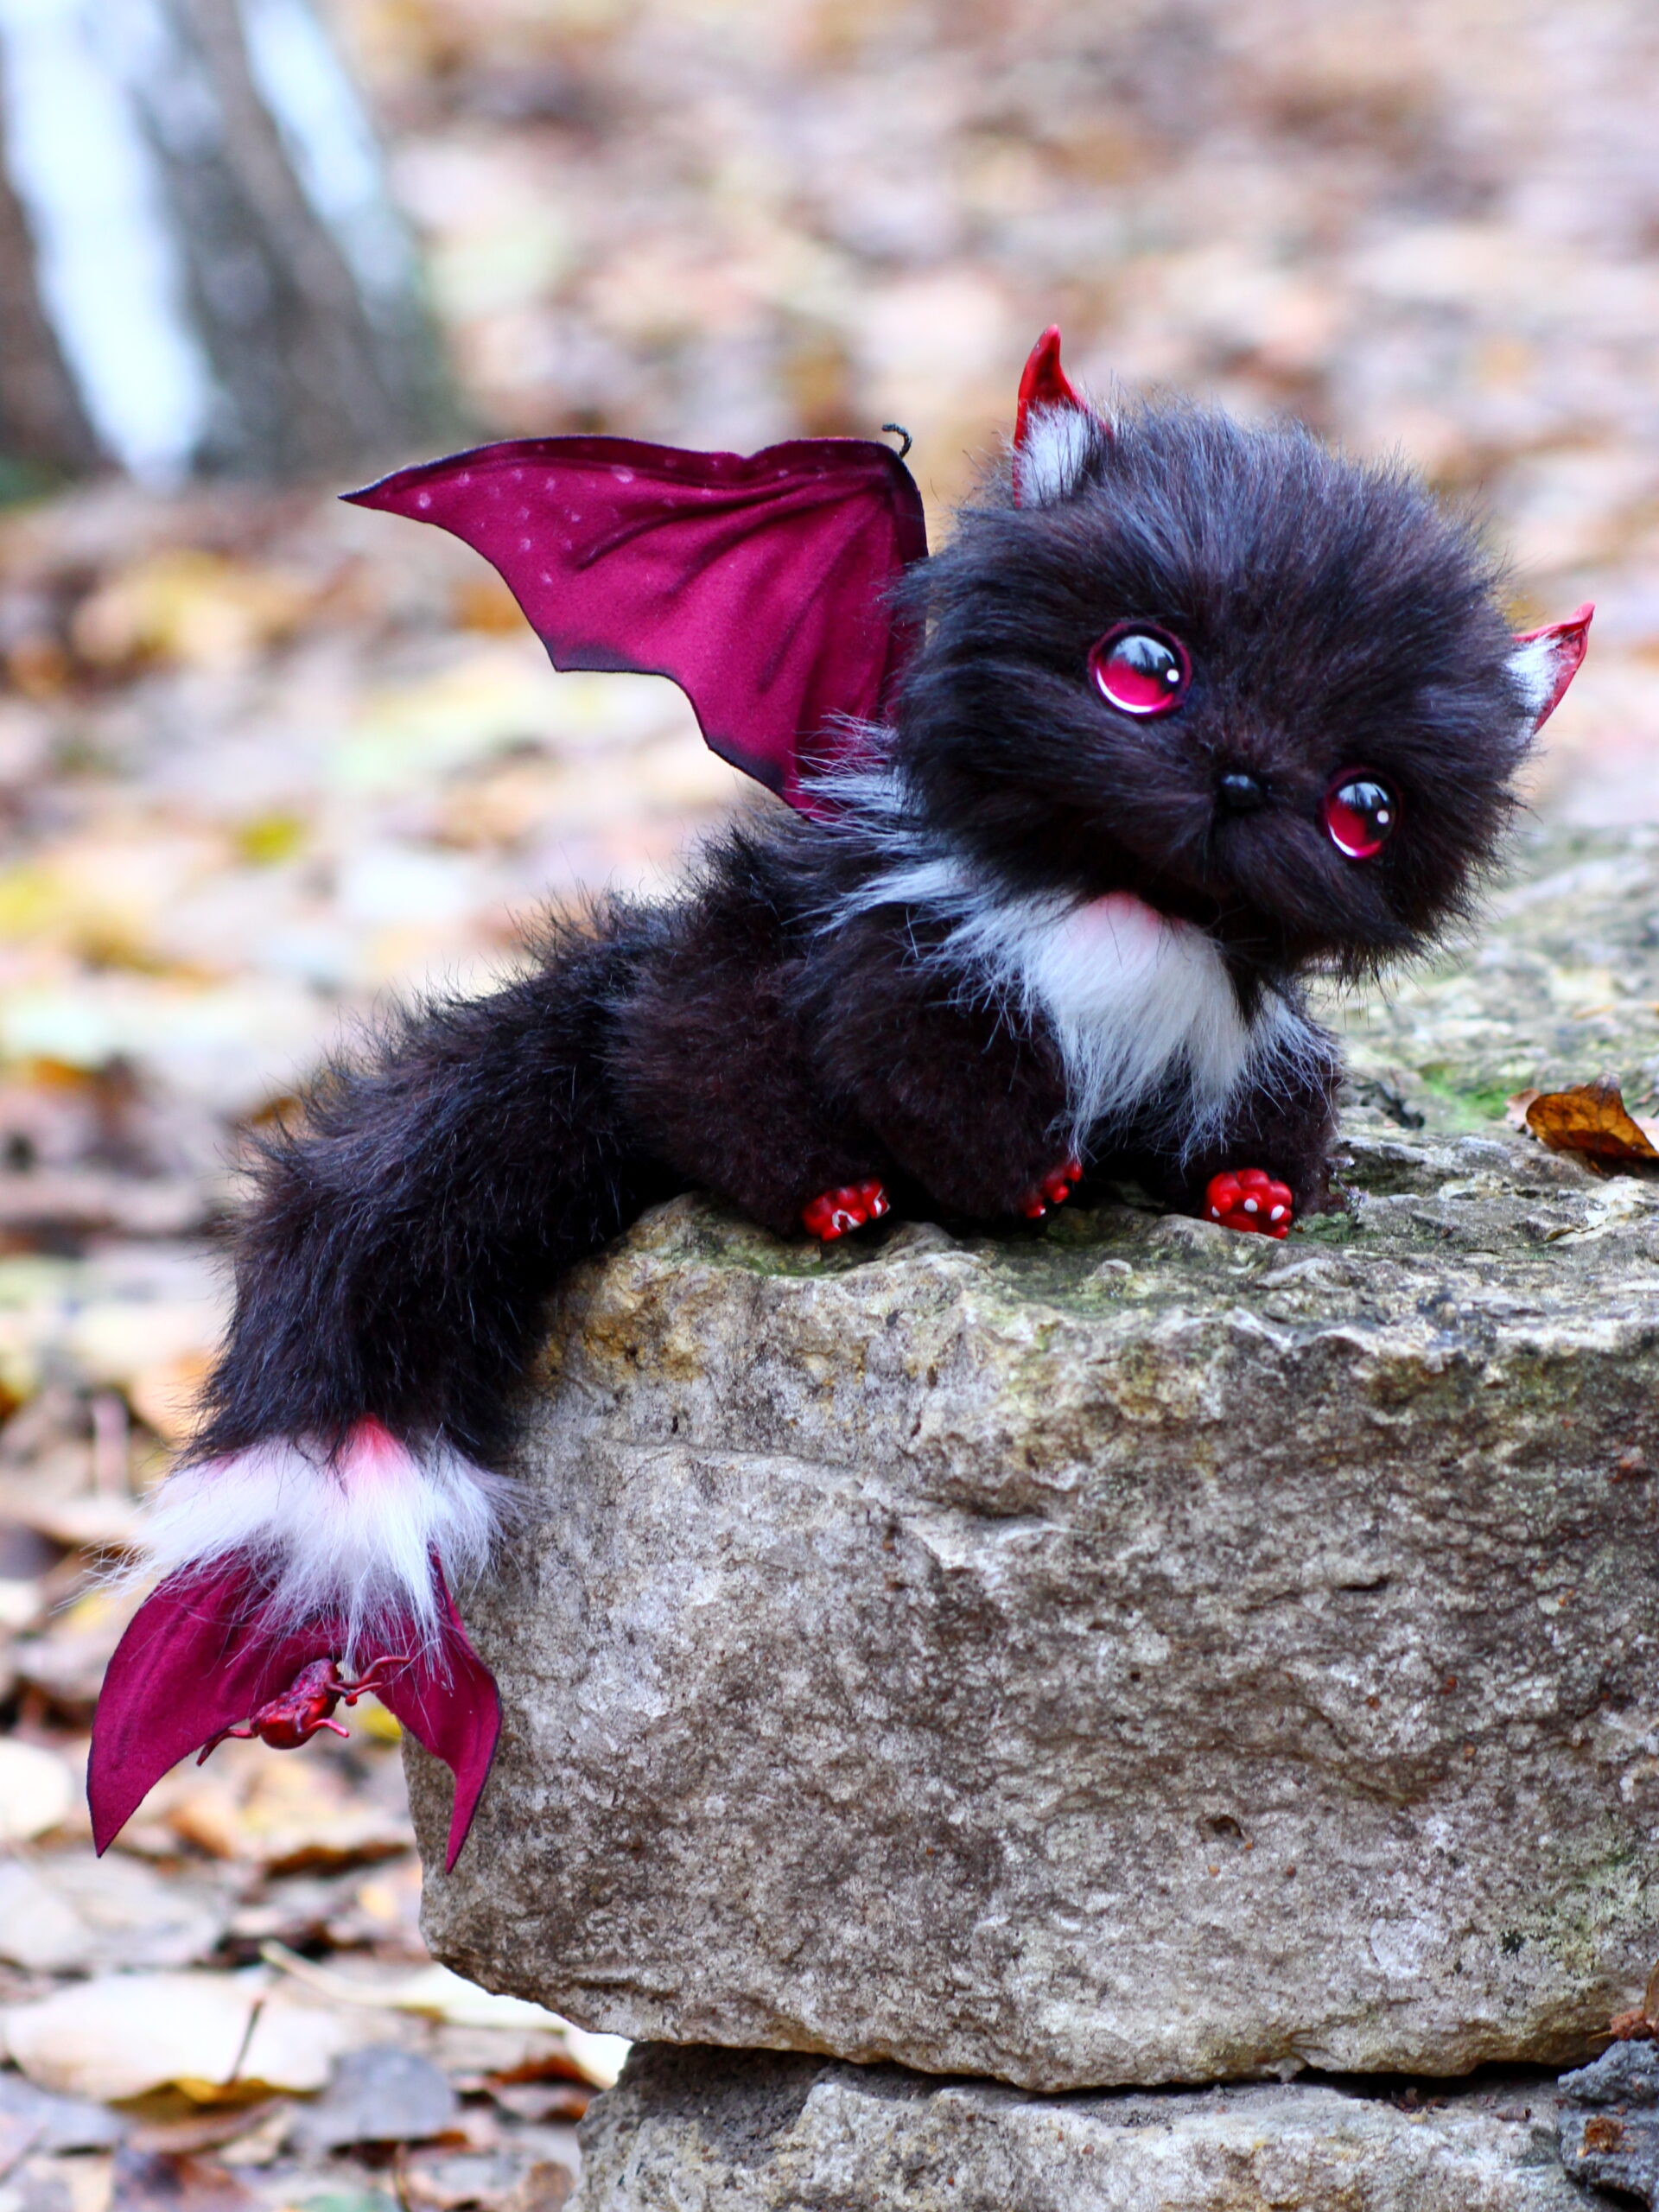 fantasy cats with wings